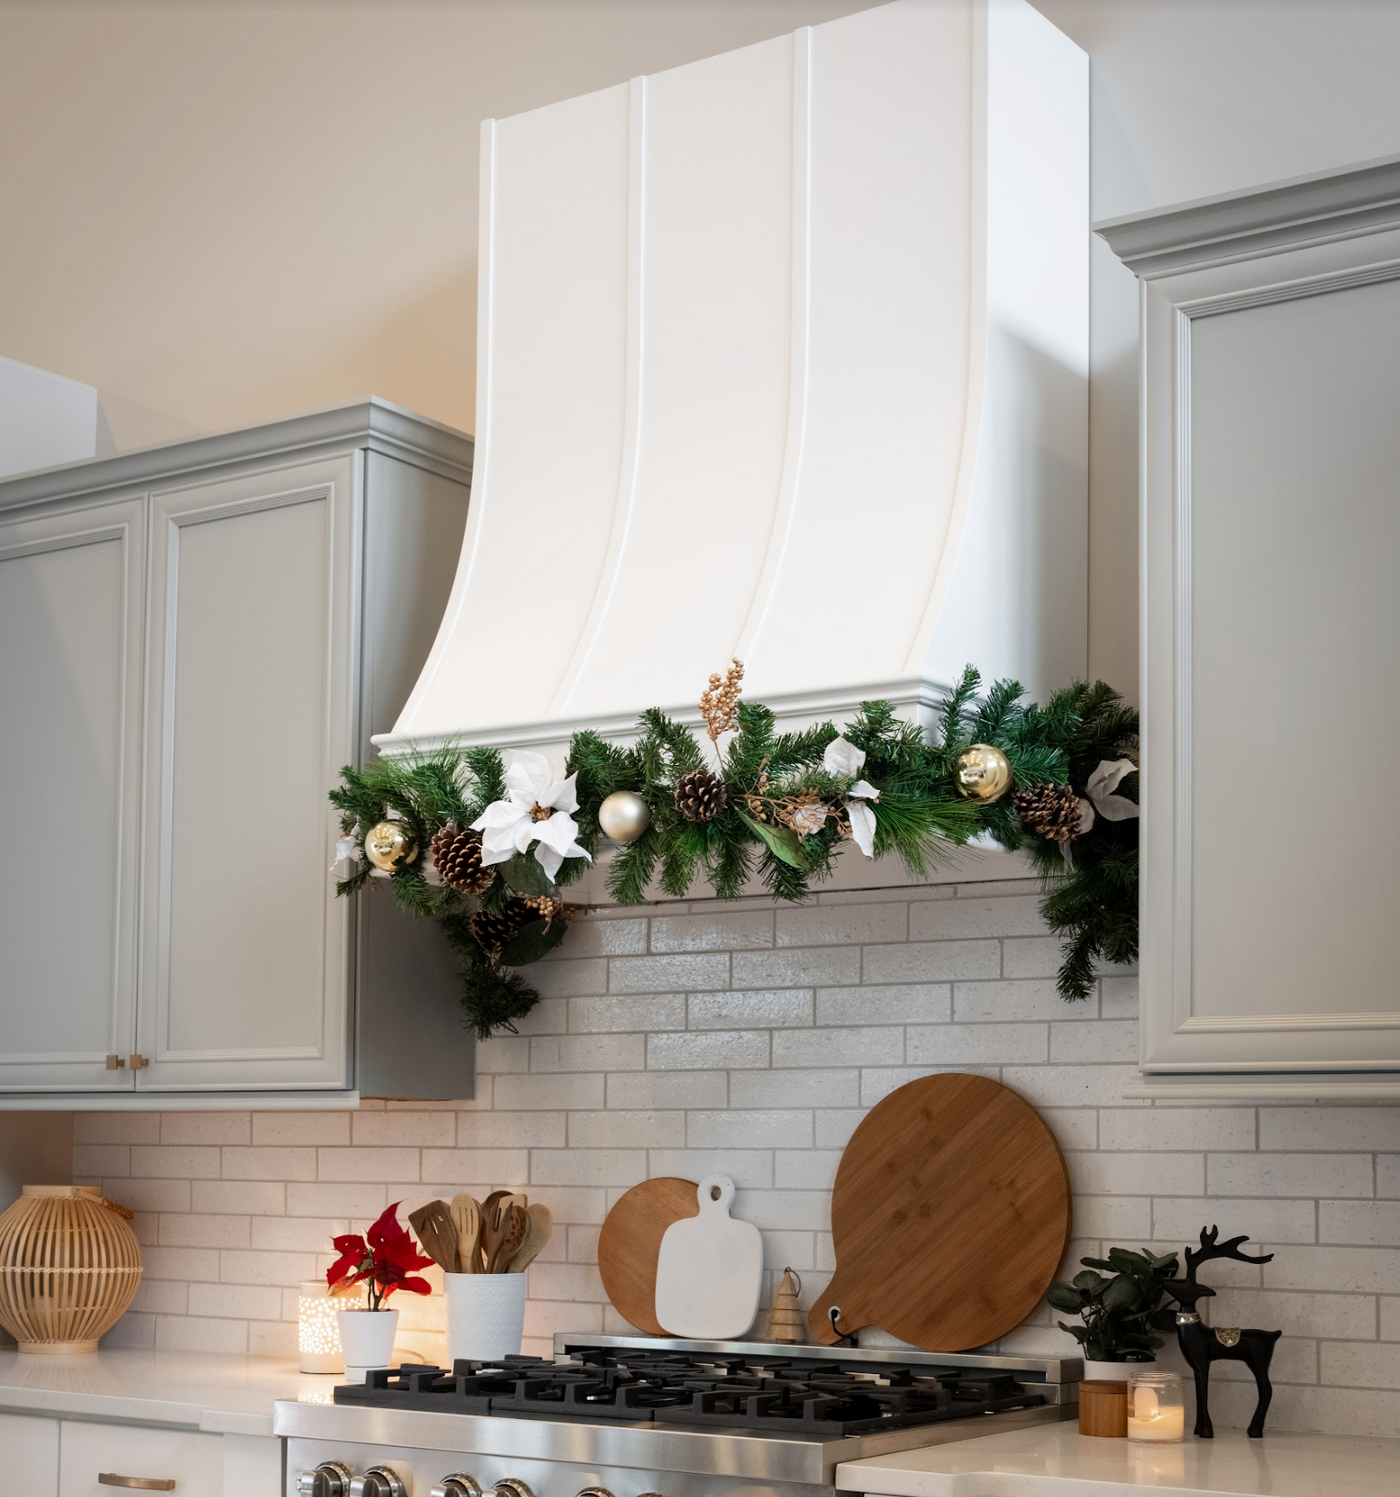 10 Must-See Kitchen Decor Ideas for the Holidays